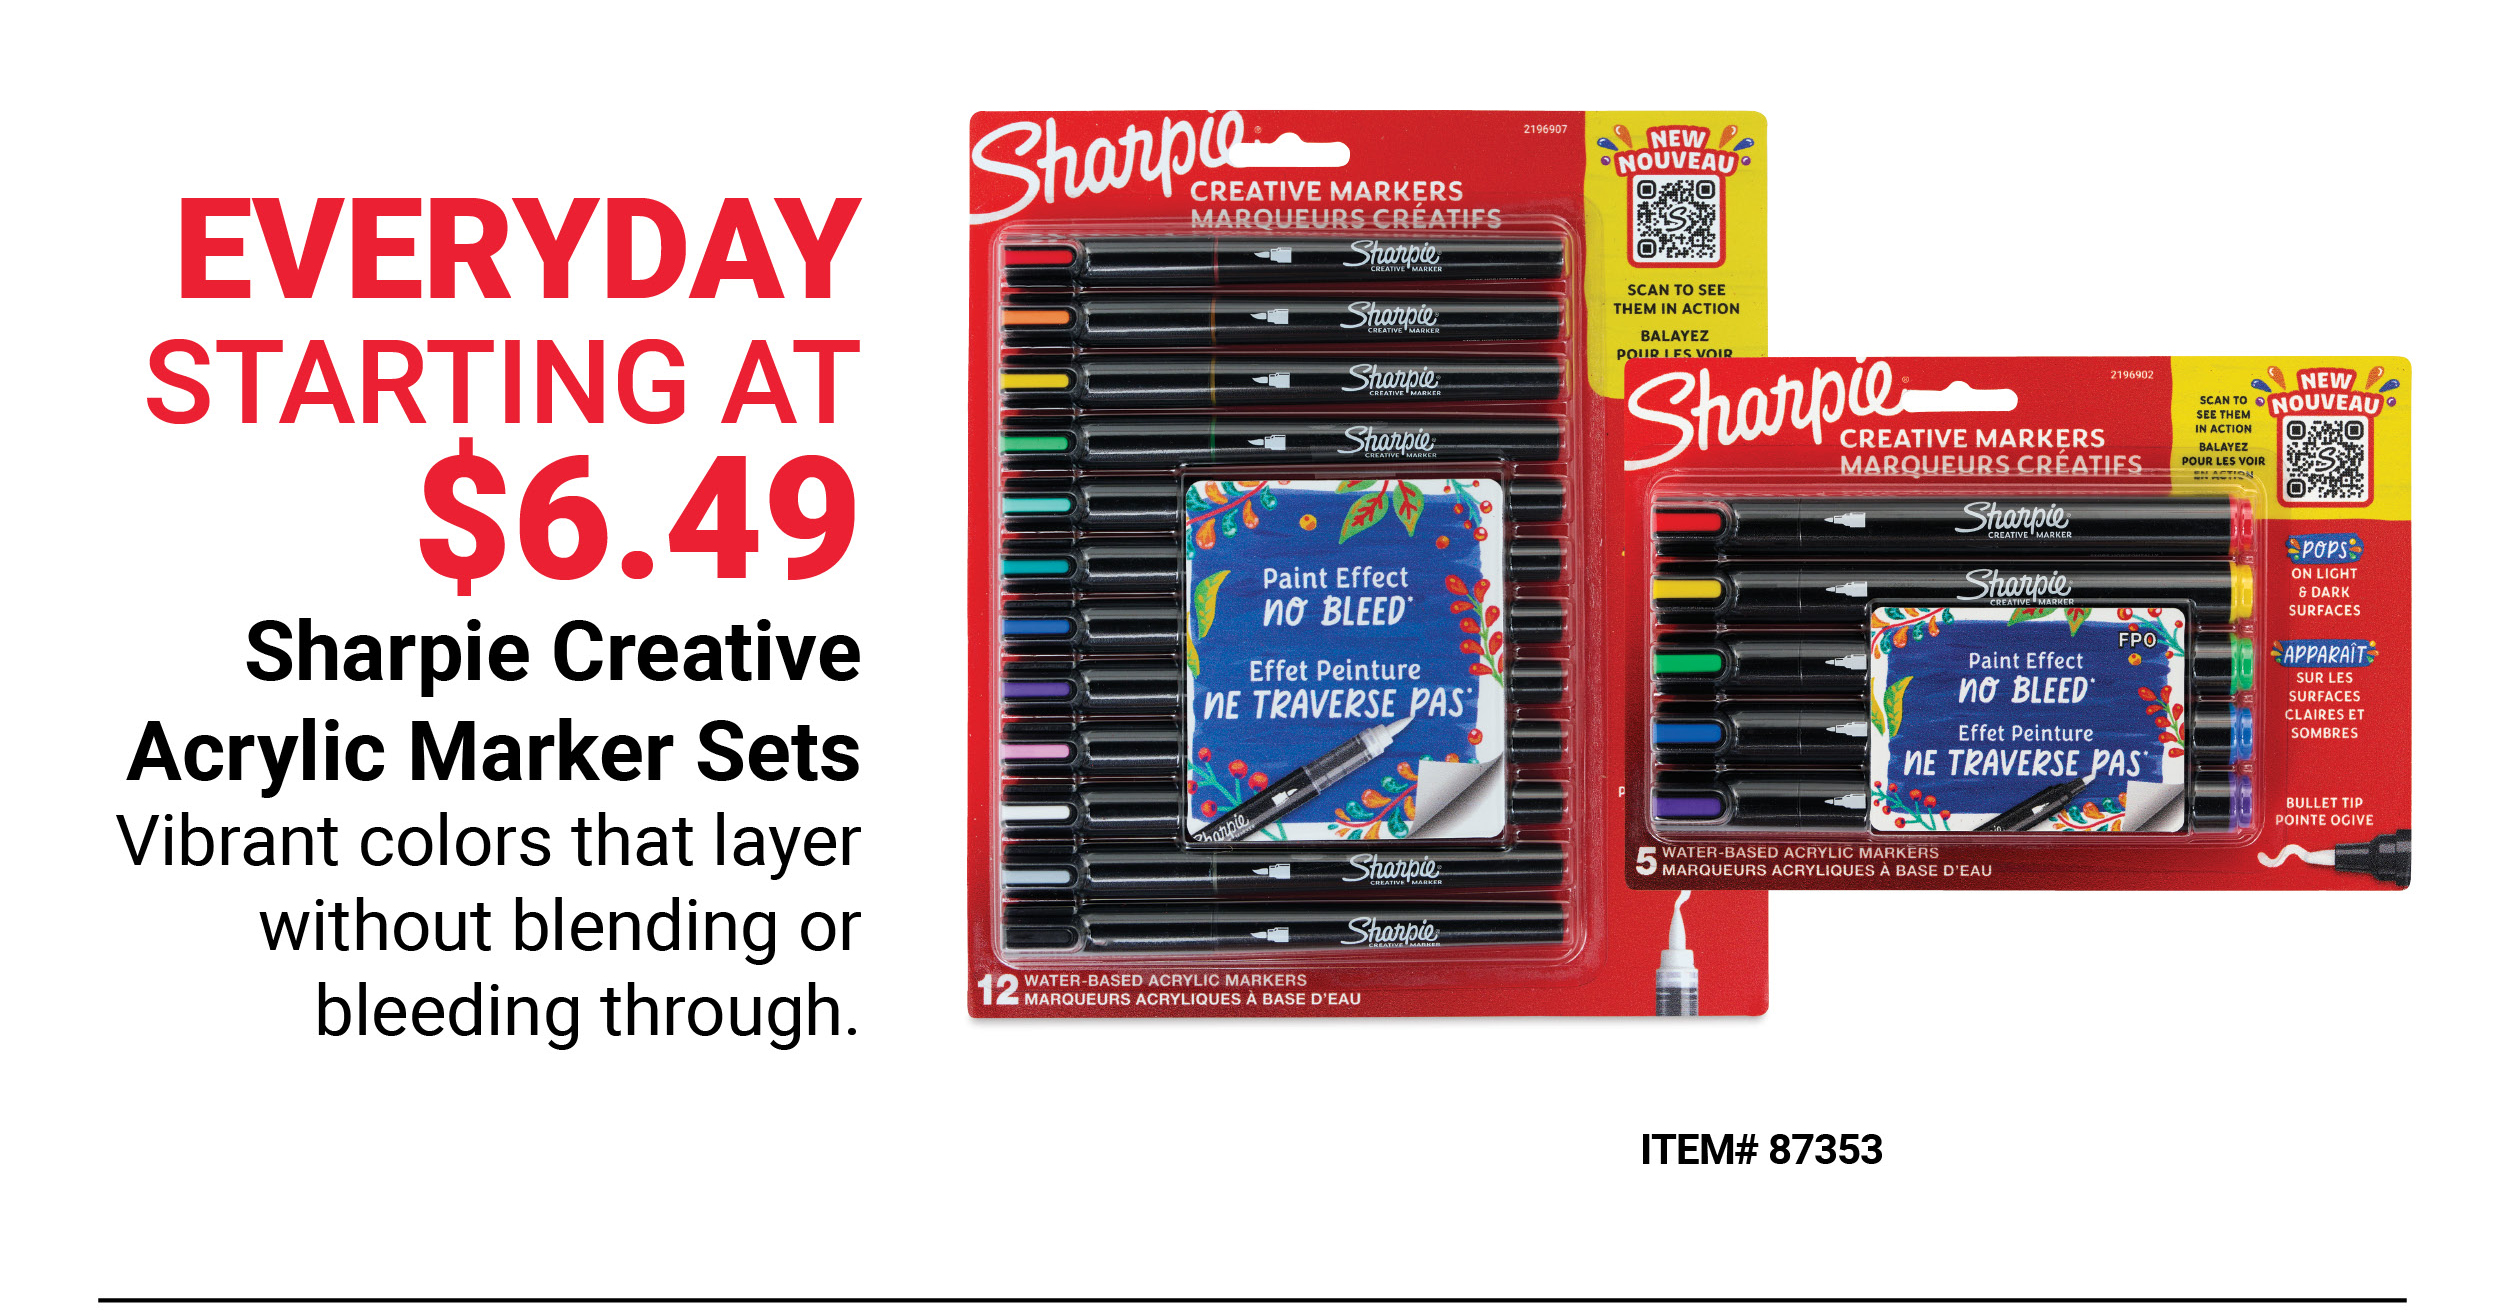 Sharpie Creative Acrylic Marker Sets Everyday Starting at $6.49